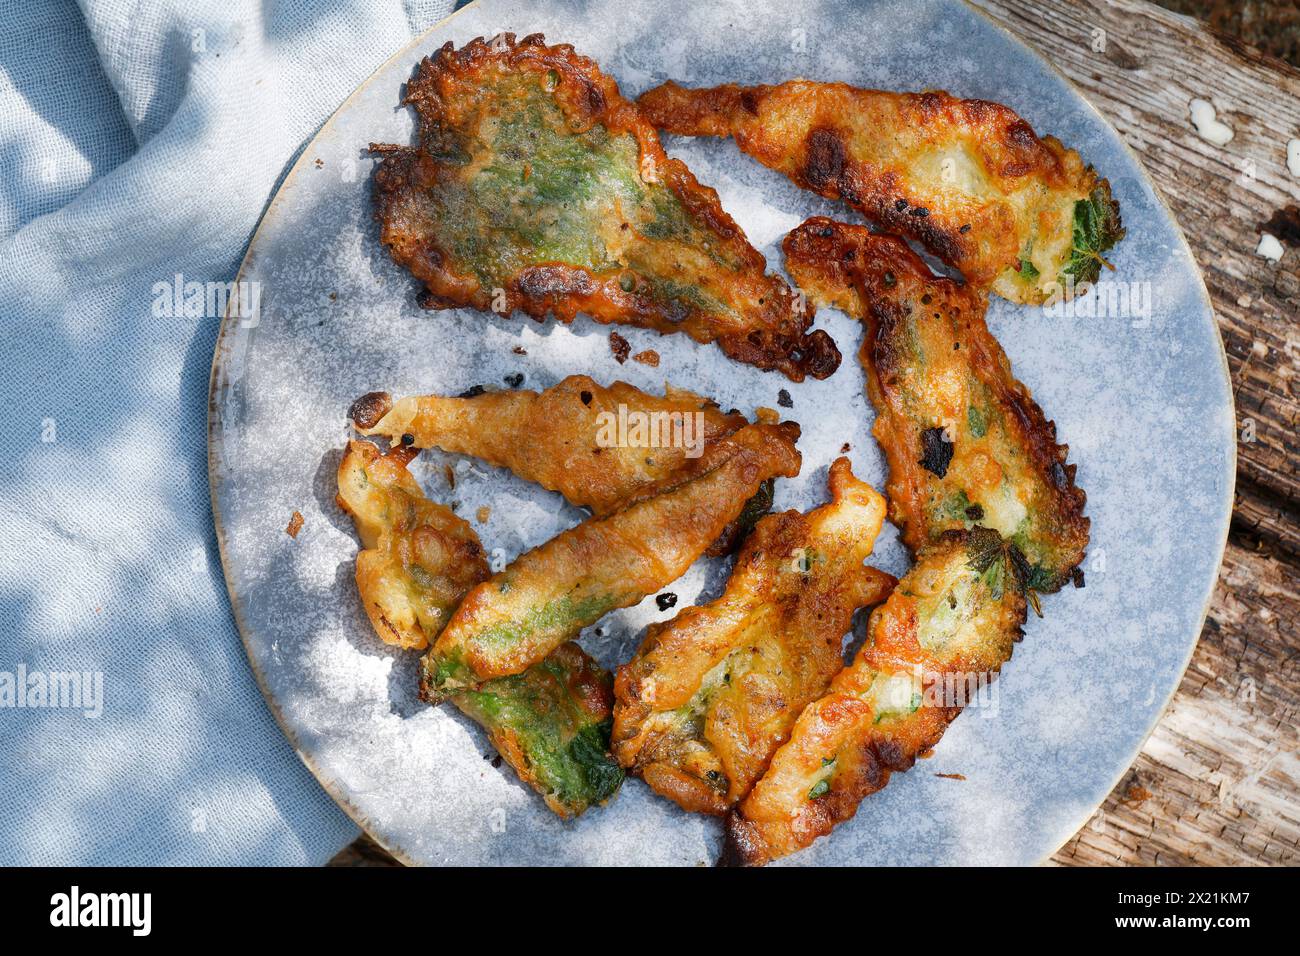 Making vegan plant-based potato chips with nettle leaves, step 5: Finished pastry sheets are arranged on a plate, series image 5/5 Stock Photo